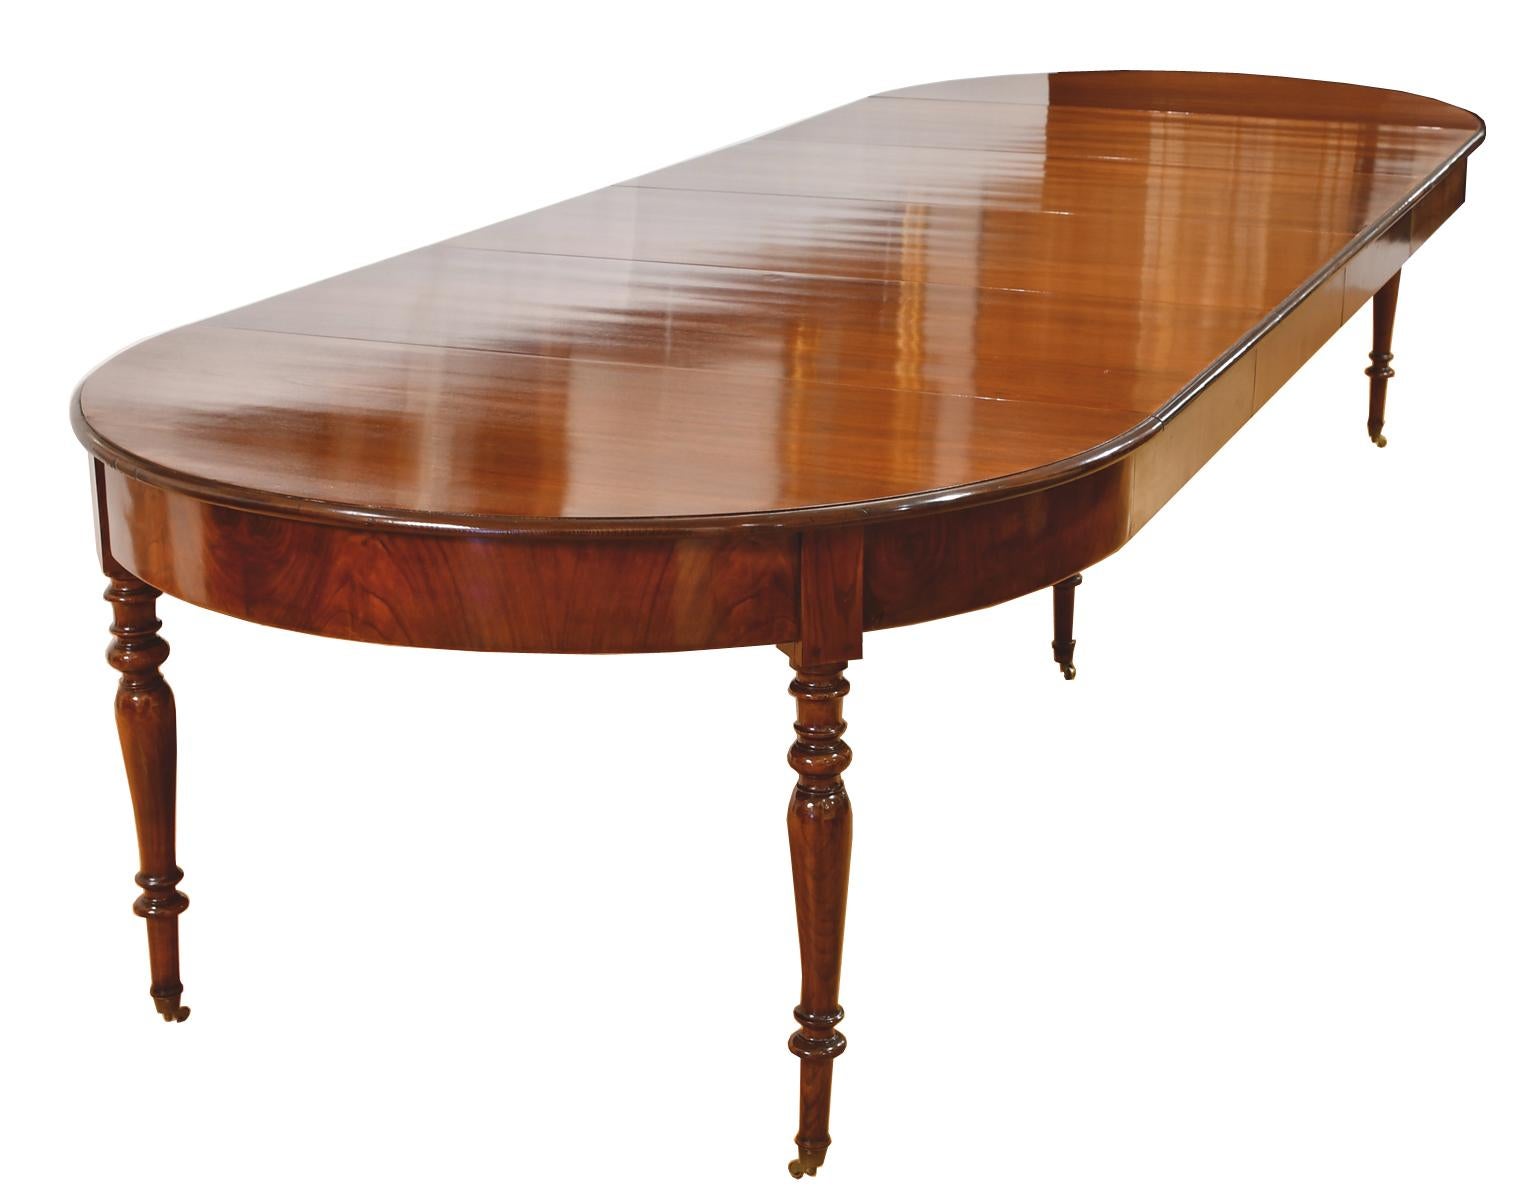 Danish Antique 12 Foot Extension Dining Table in Mahogany w Racetrack Top & Four Leaves